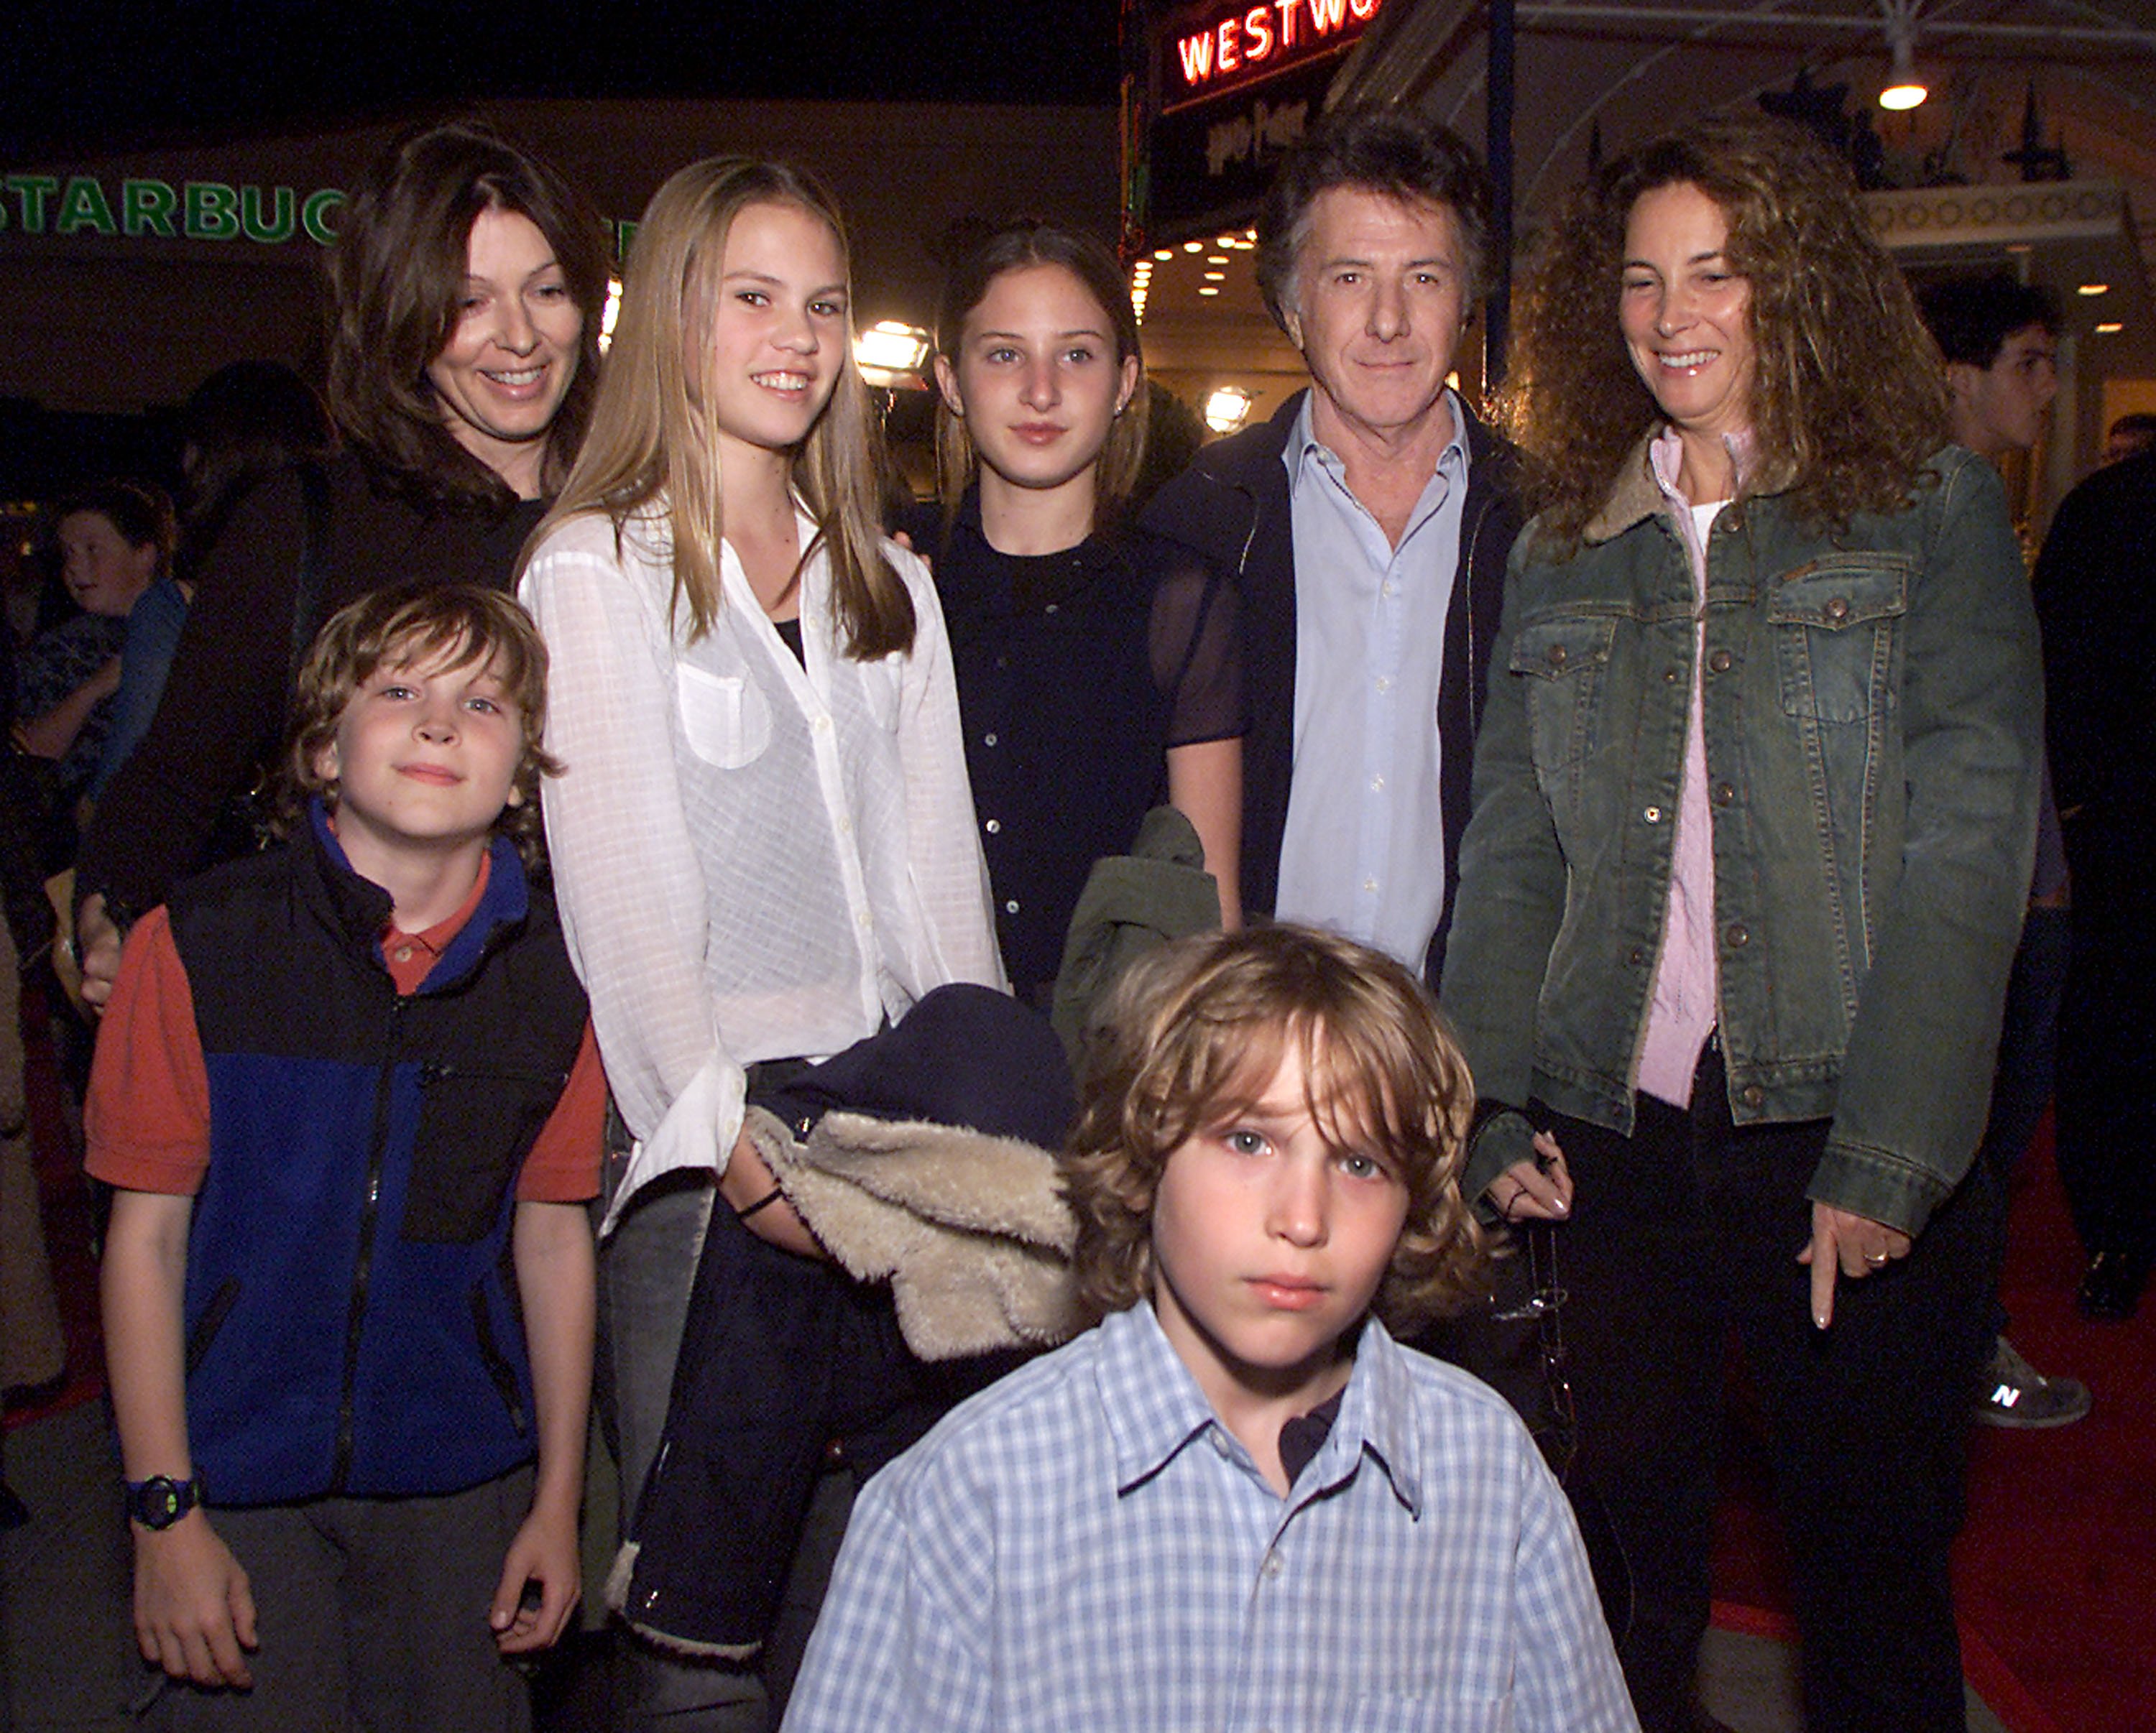 Dustin Hoffman and wife Lisa with their children and friends at the premiere of "Harry Potter and the Sorcerer's Stone" in Los Angeles, Ca. Wednesday, November 14, 2001. | Source: Getty Images